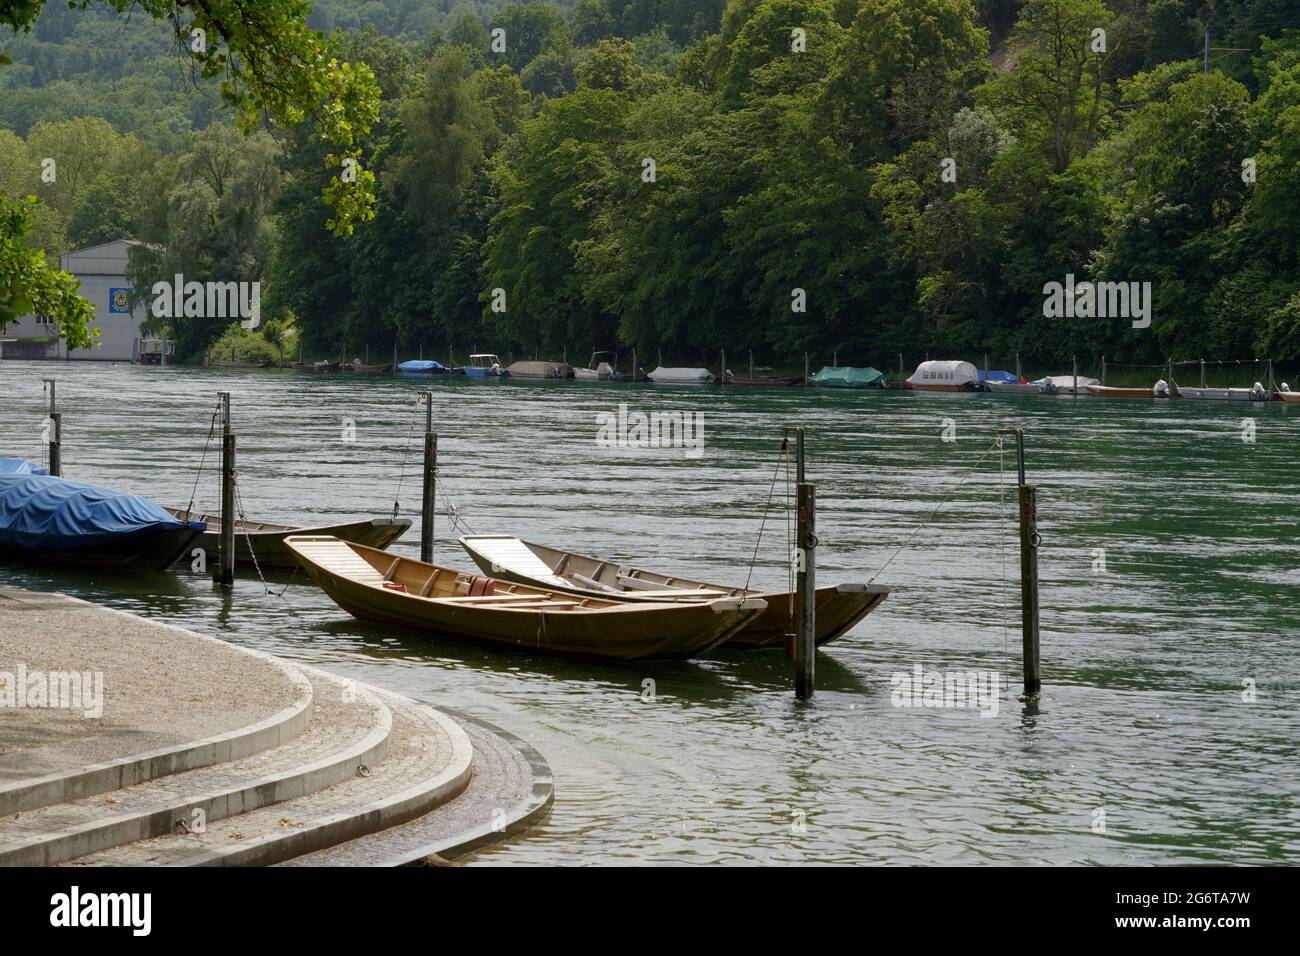 Wooden boats moored at promenade along Rhine river in Schaffhausen, Switzerland. They are called weidling boot in German language. Stock Photo